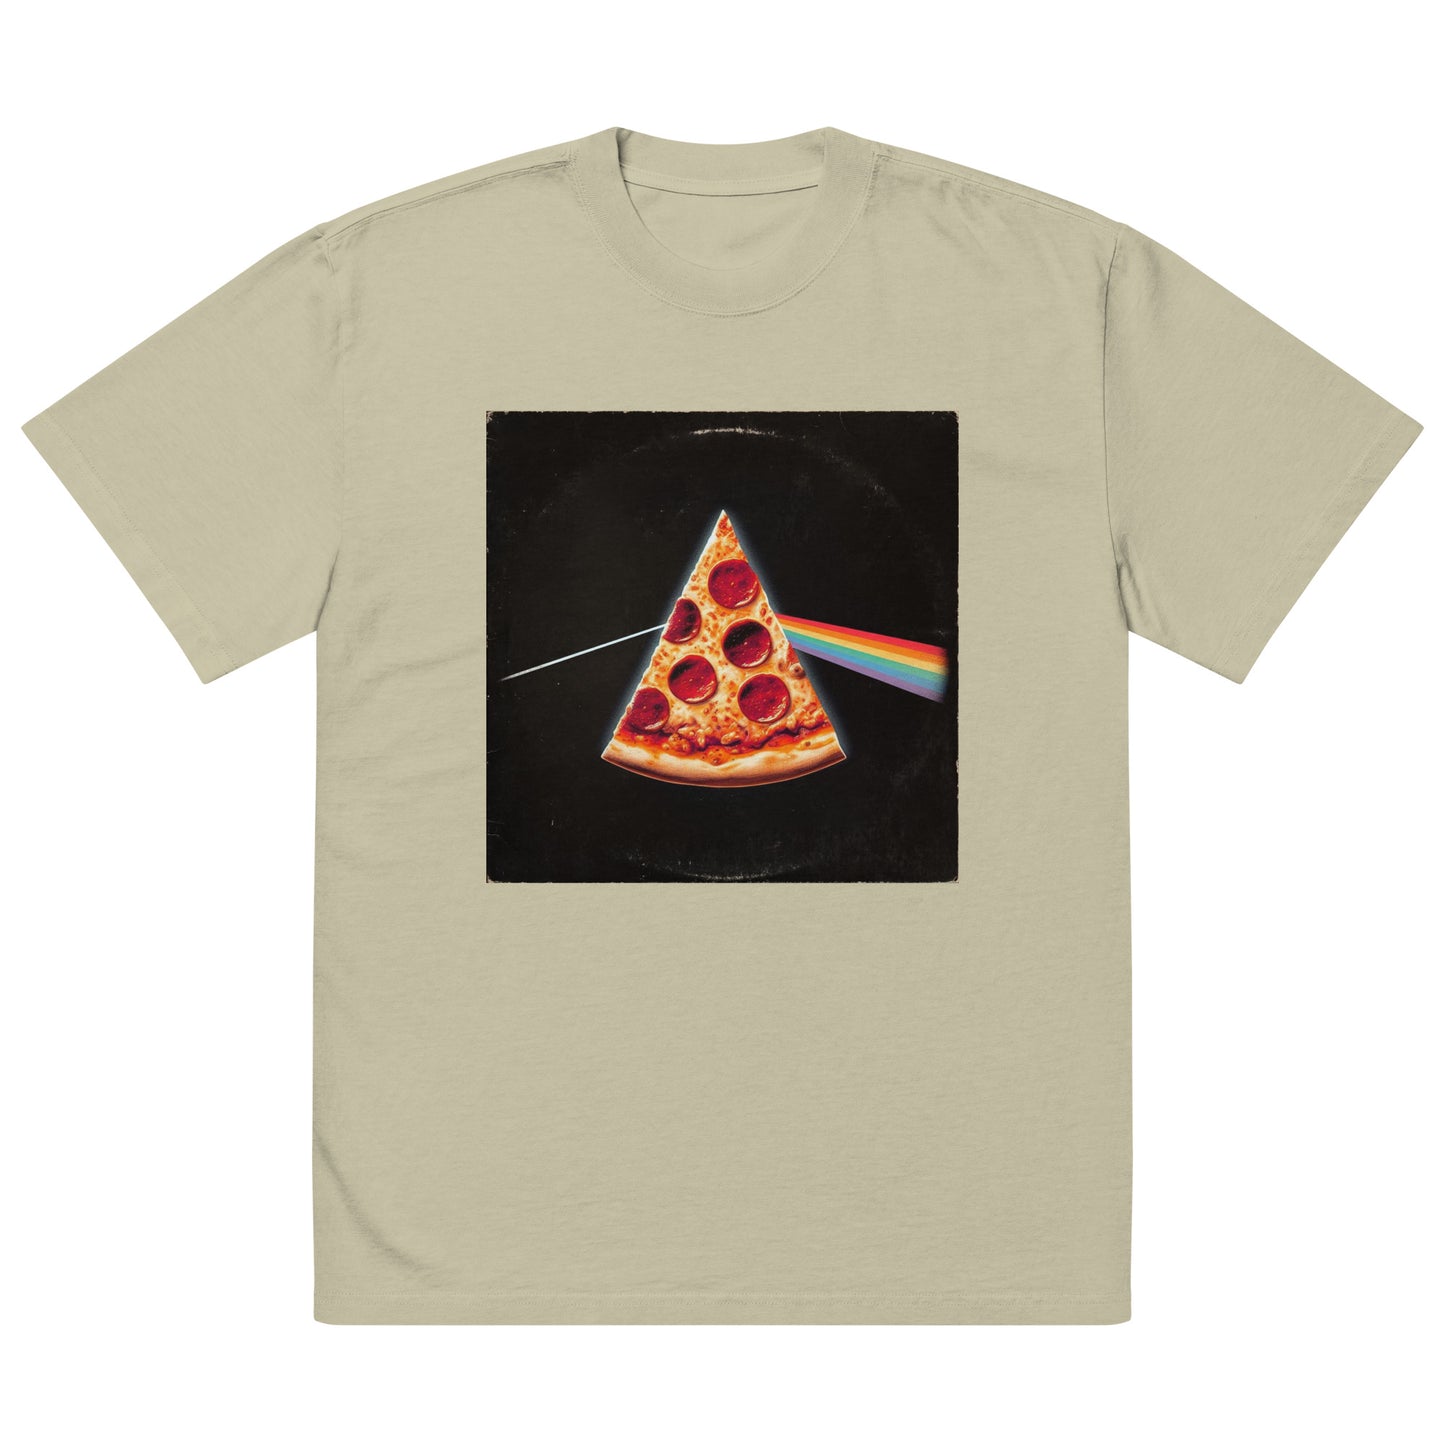 "Dark Side of the Slice" Premium Oversized faded t-shirt - Tower Pizza Gift Shop